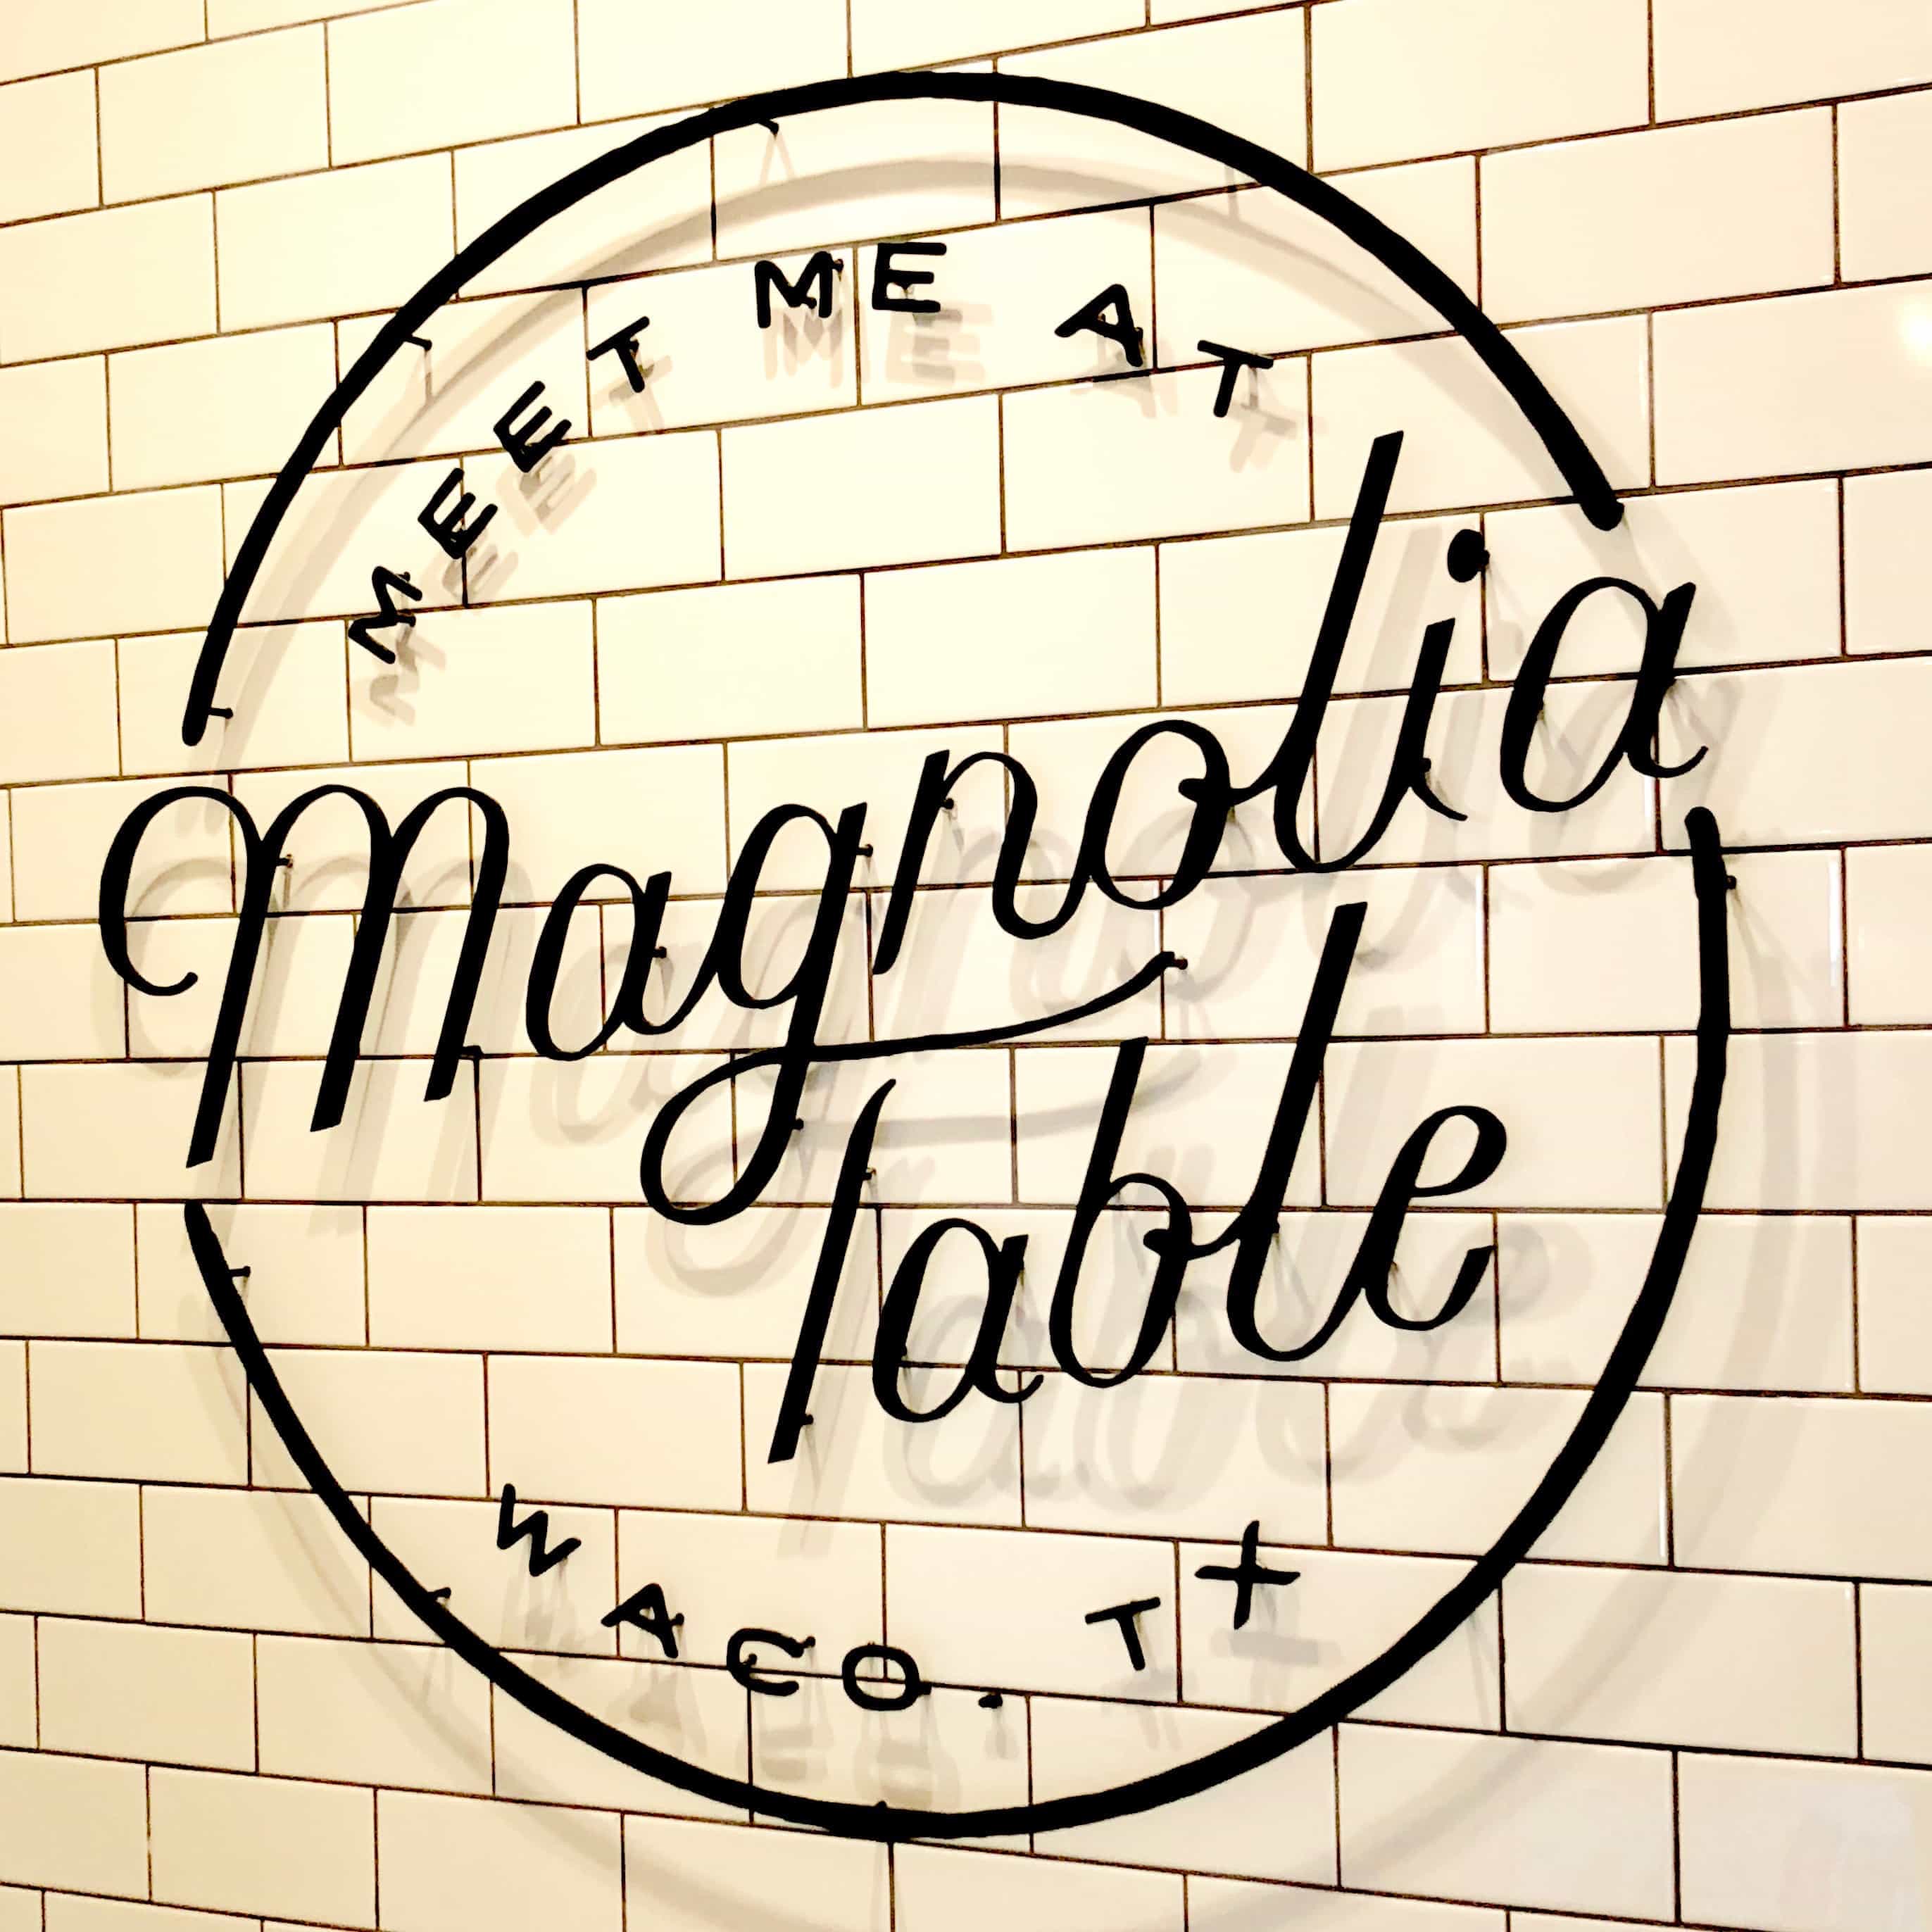 Magnolia Table Entrance sign from the restaurant in waco